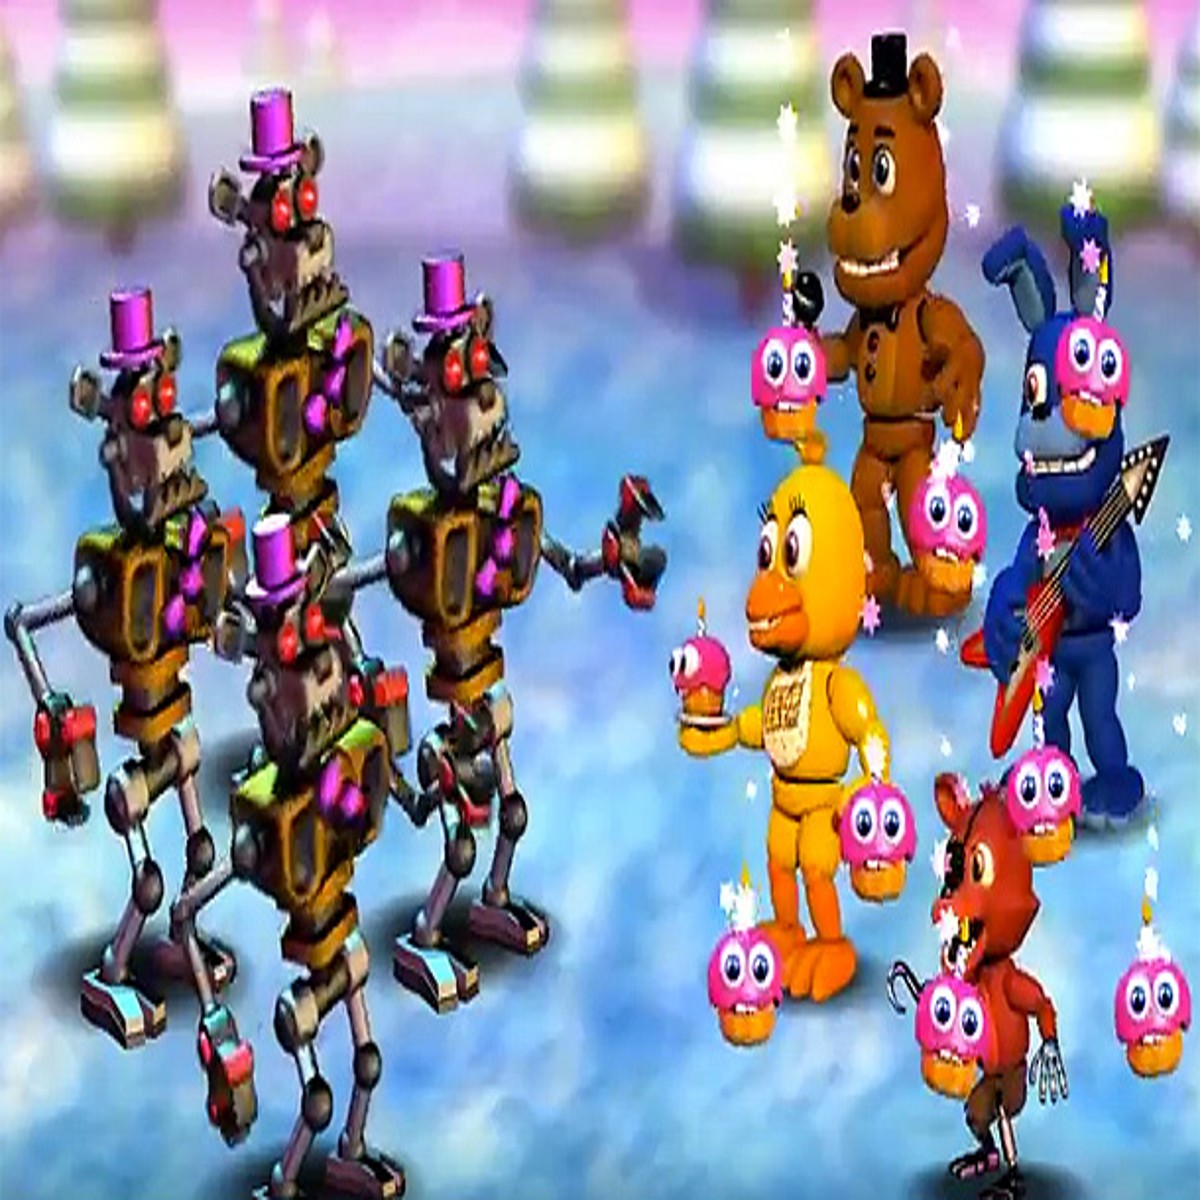 How To Get FNAF World For FREE On STEAM (2022) 